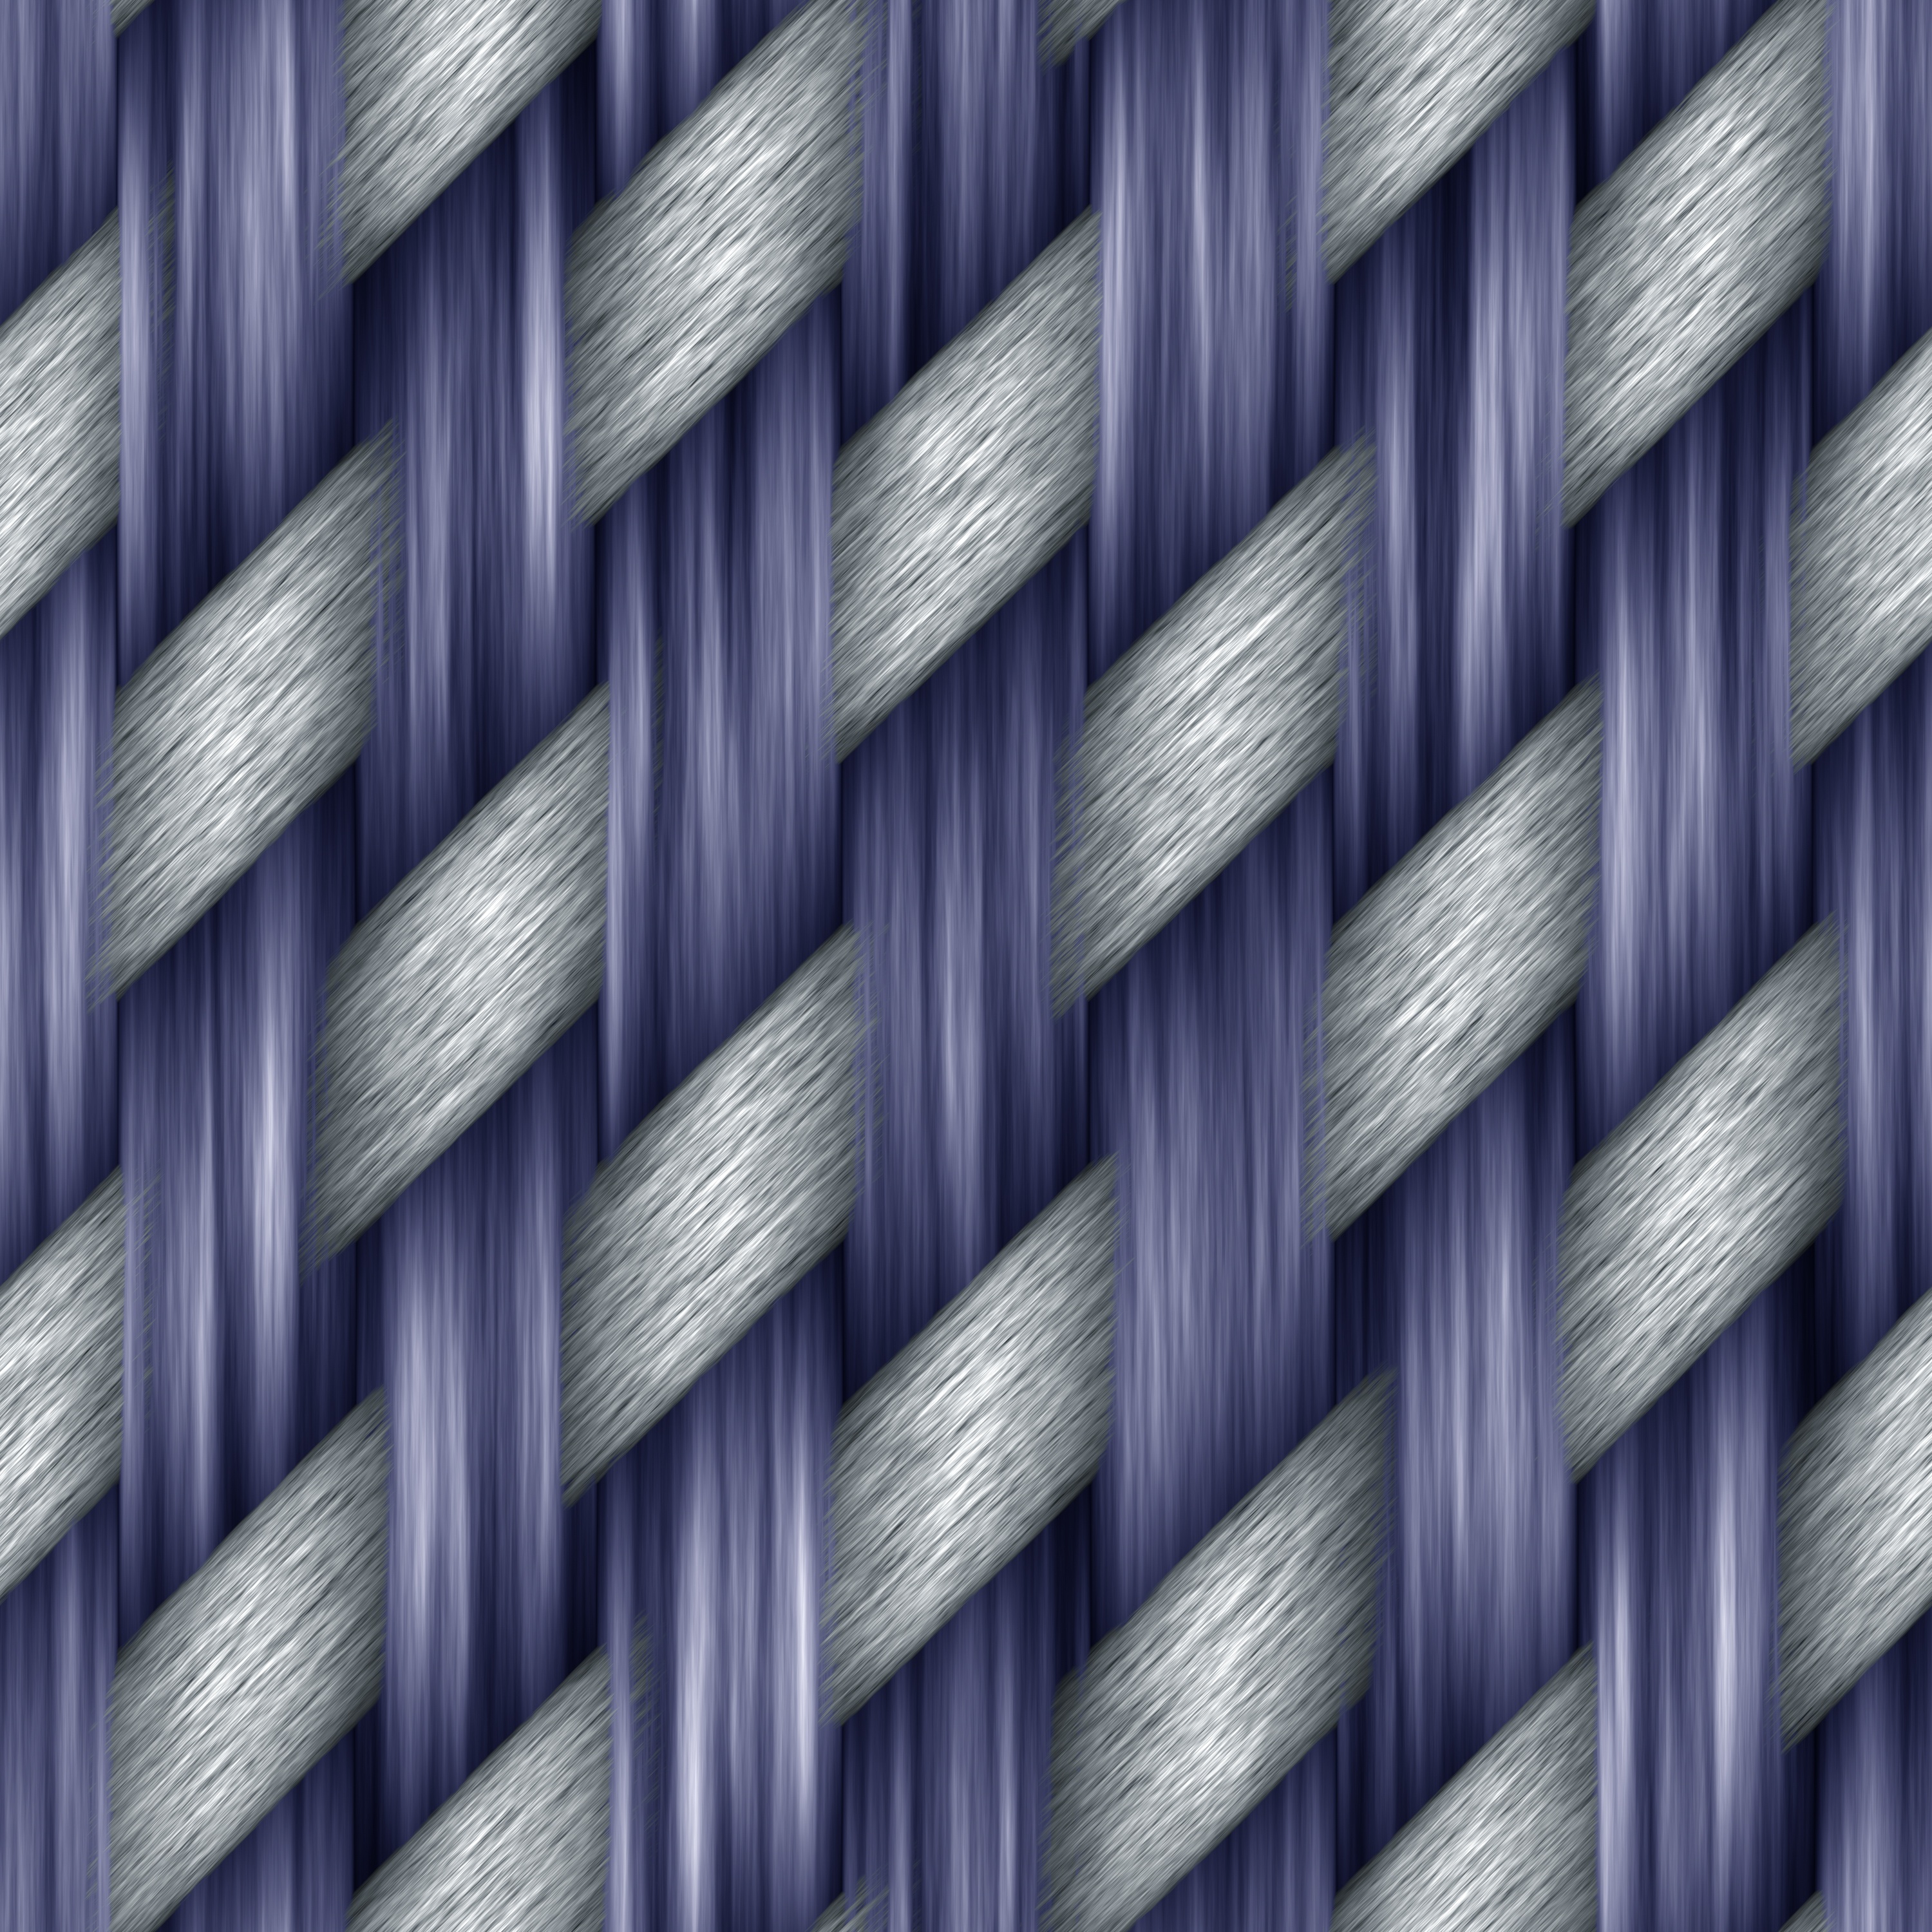 textures, vertical, lilac, texture, lines, grey, weave, wicker, braided